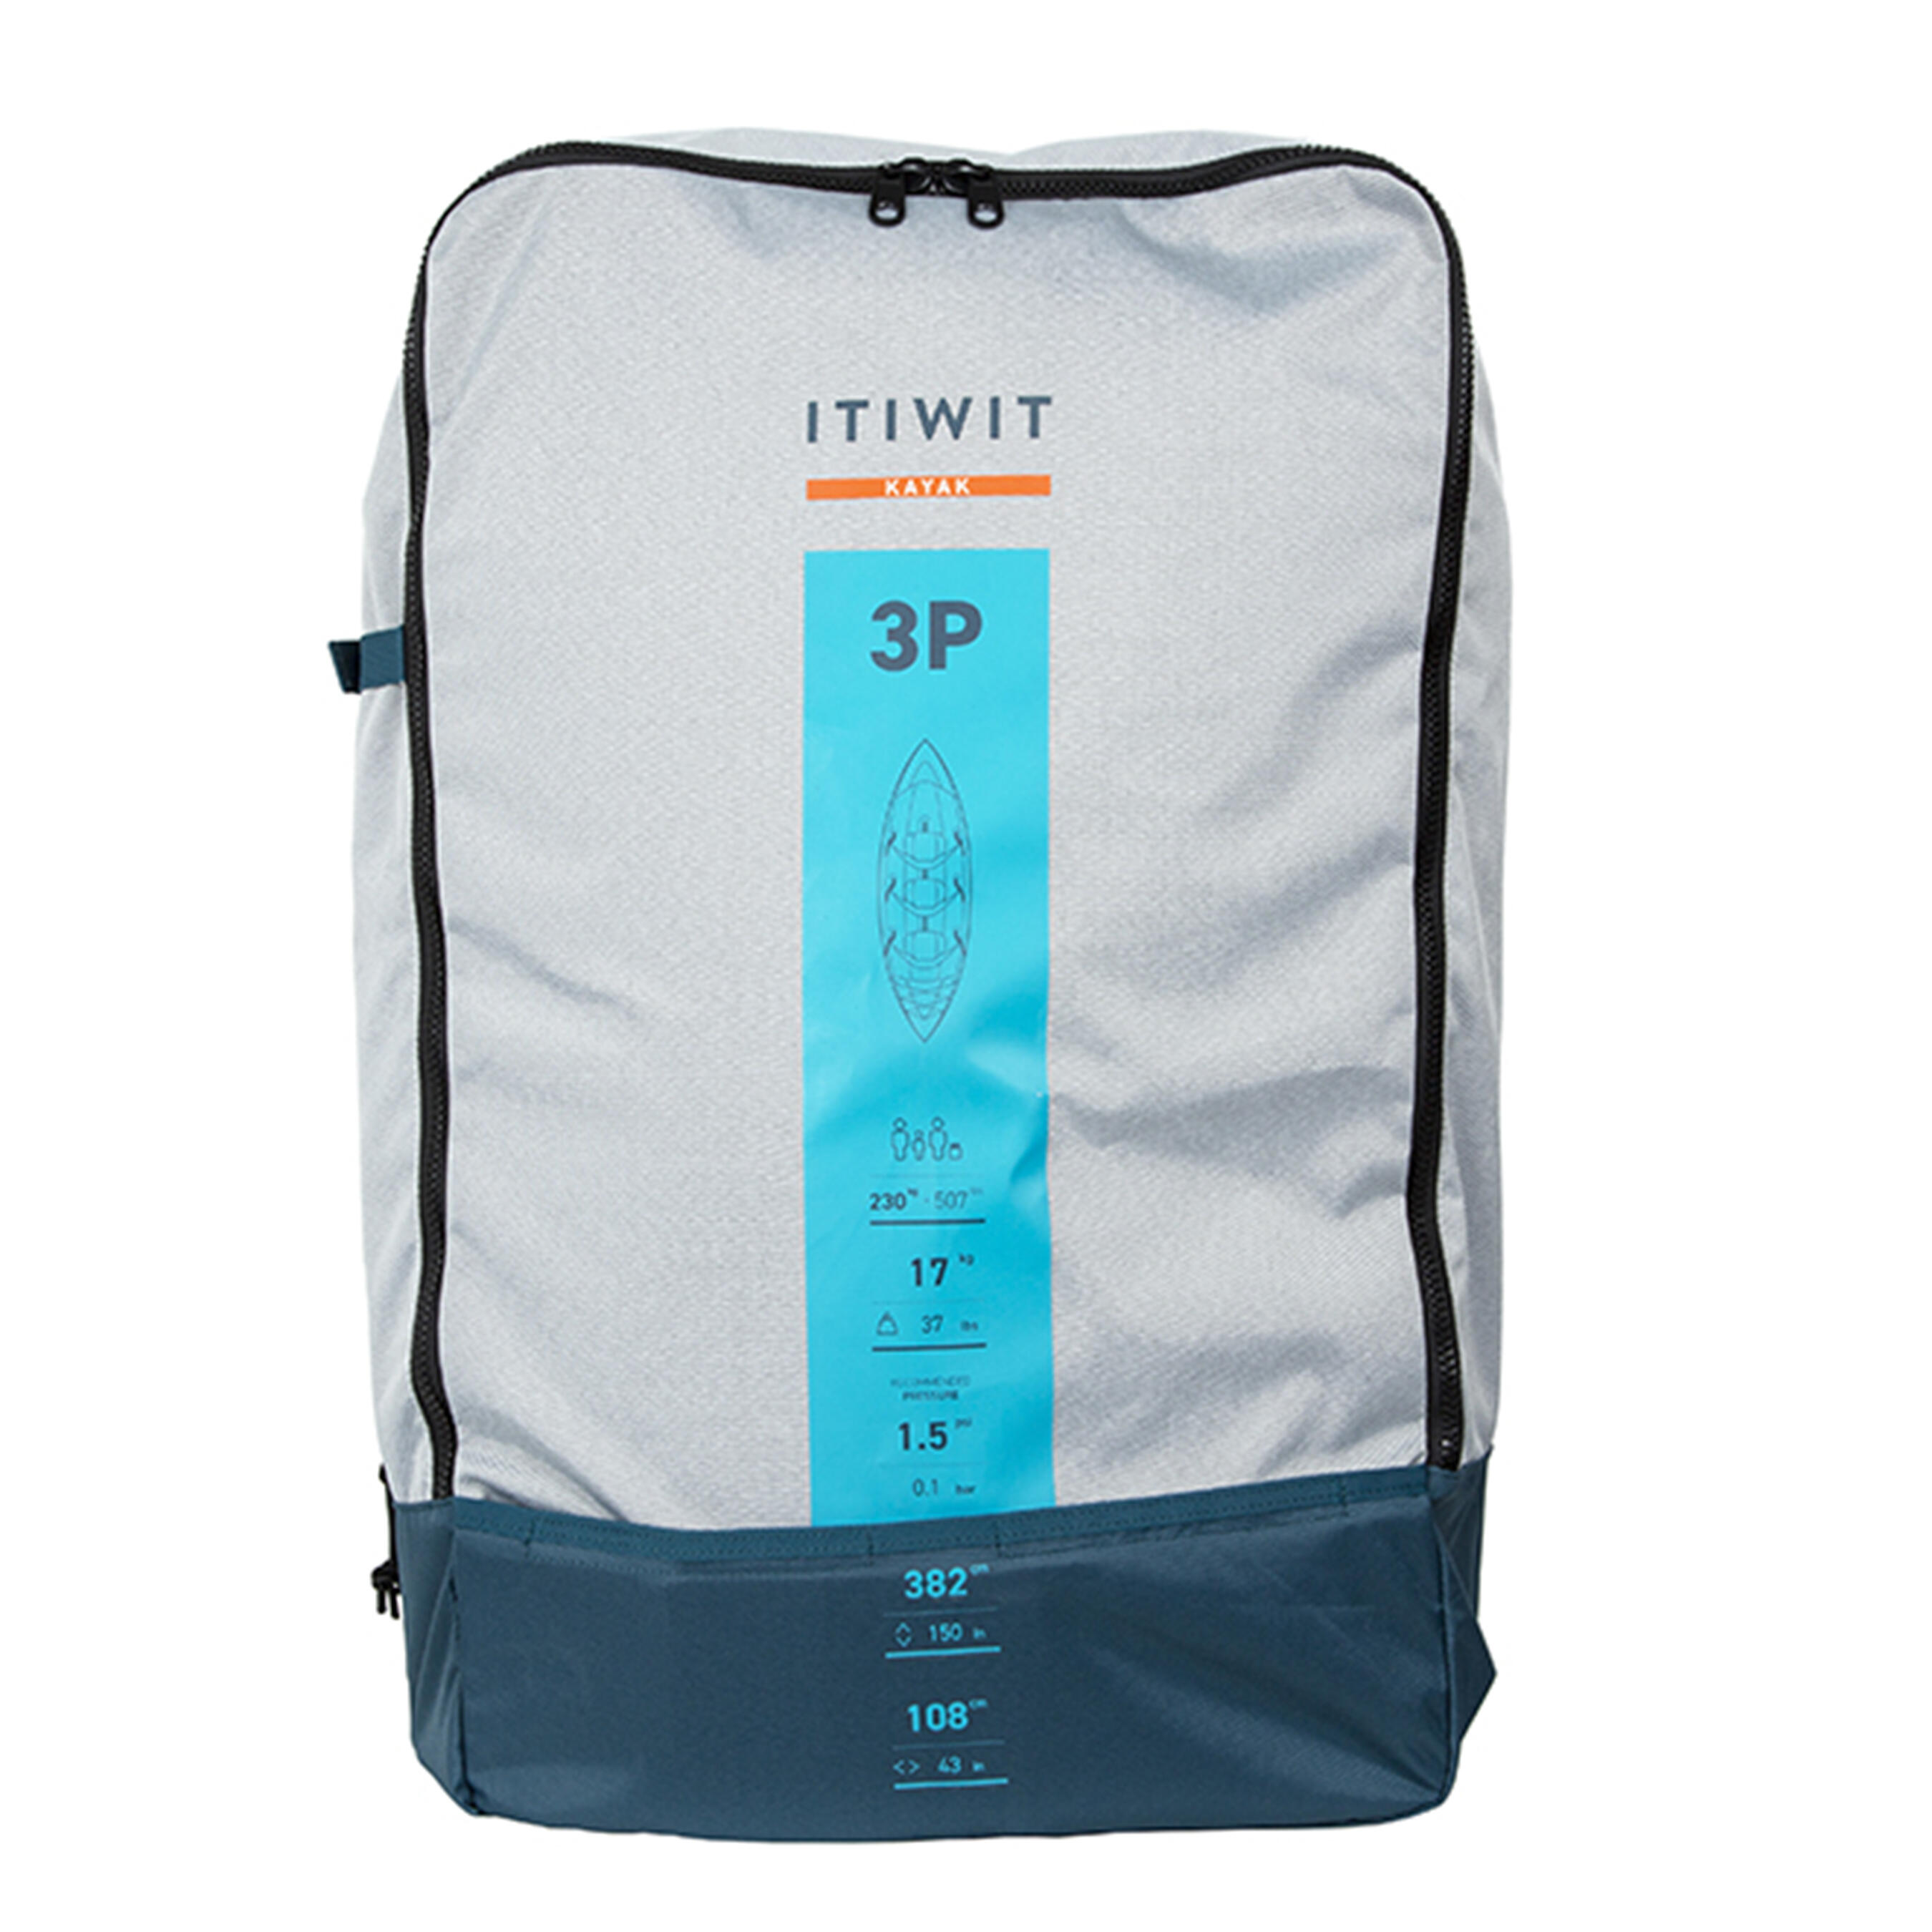 Itiwit CaRRy Backpack For 100 1p. 2p Or 3p Kayaks